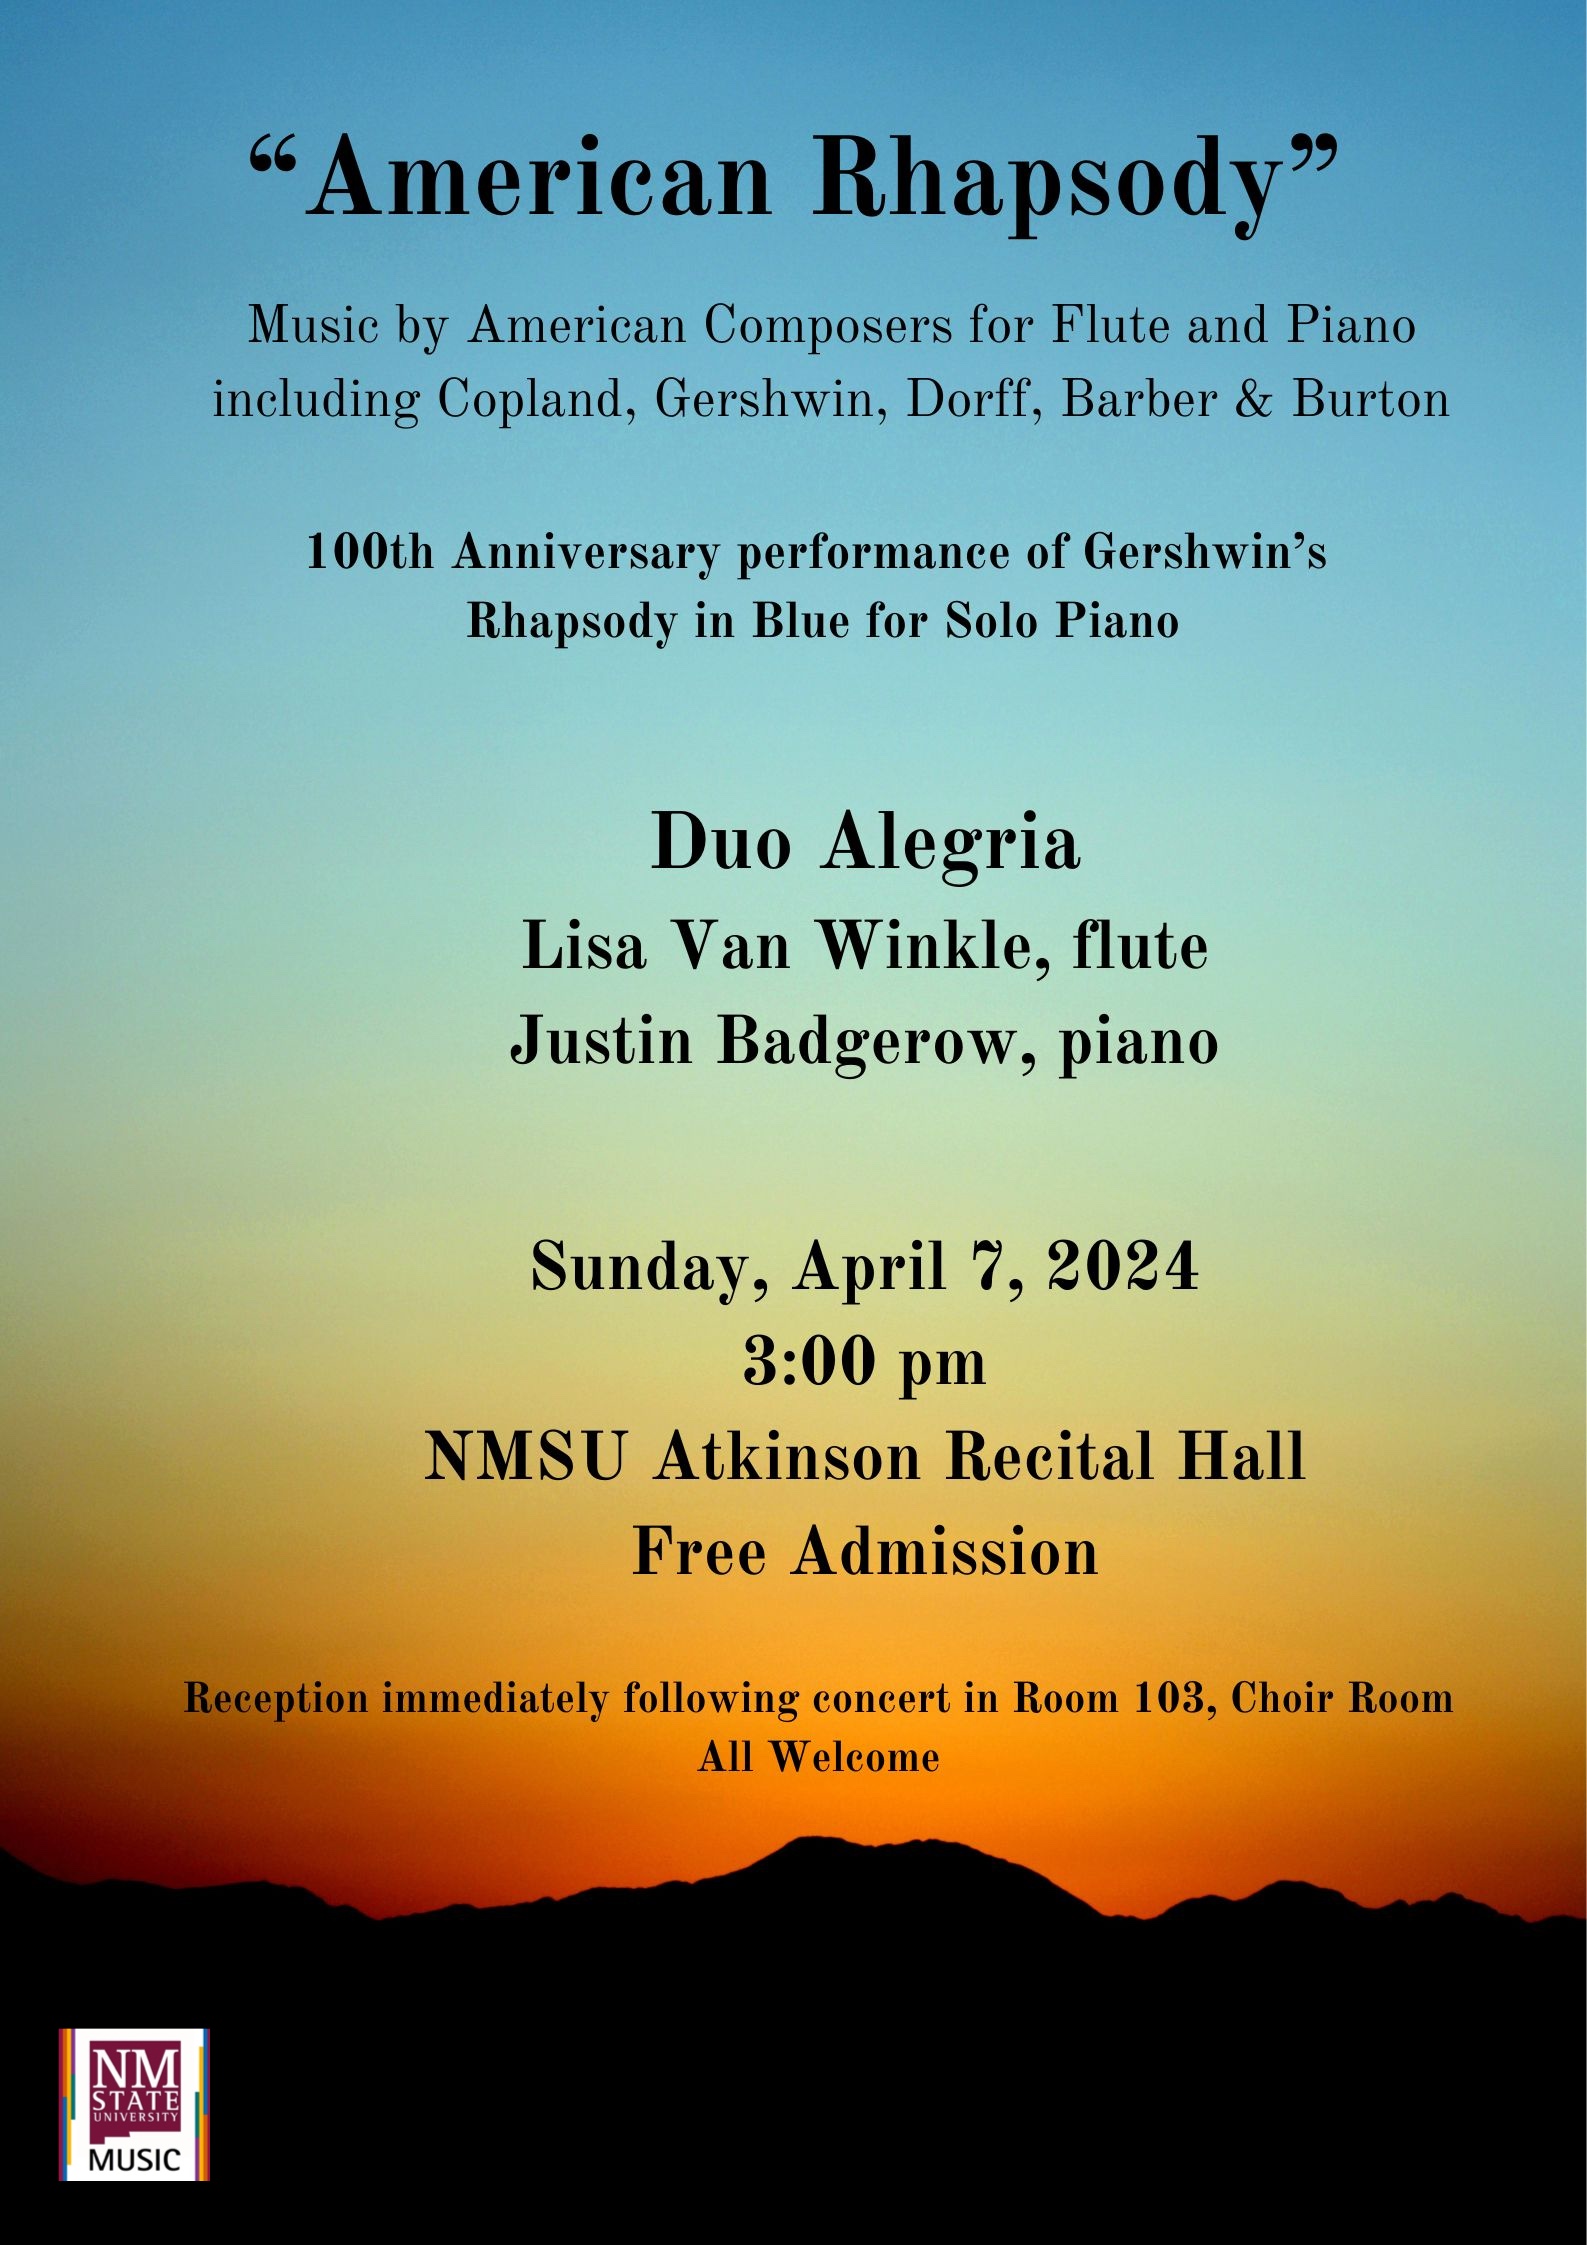 concert will feature music of Gershwin, Copland and more performed on flute with piano 